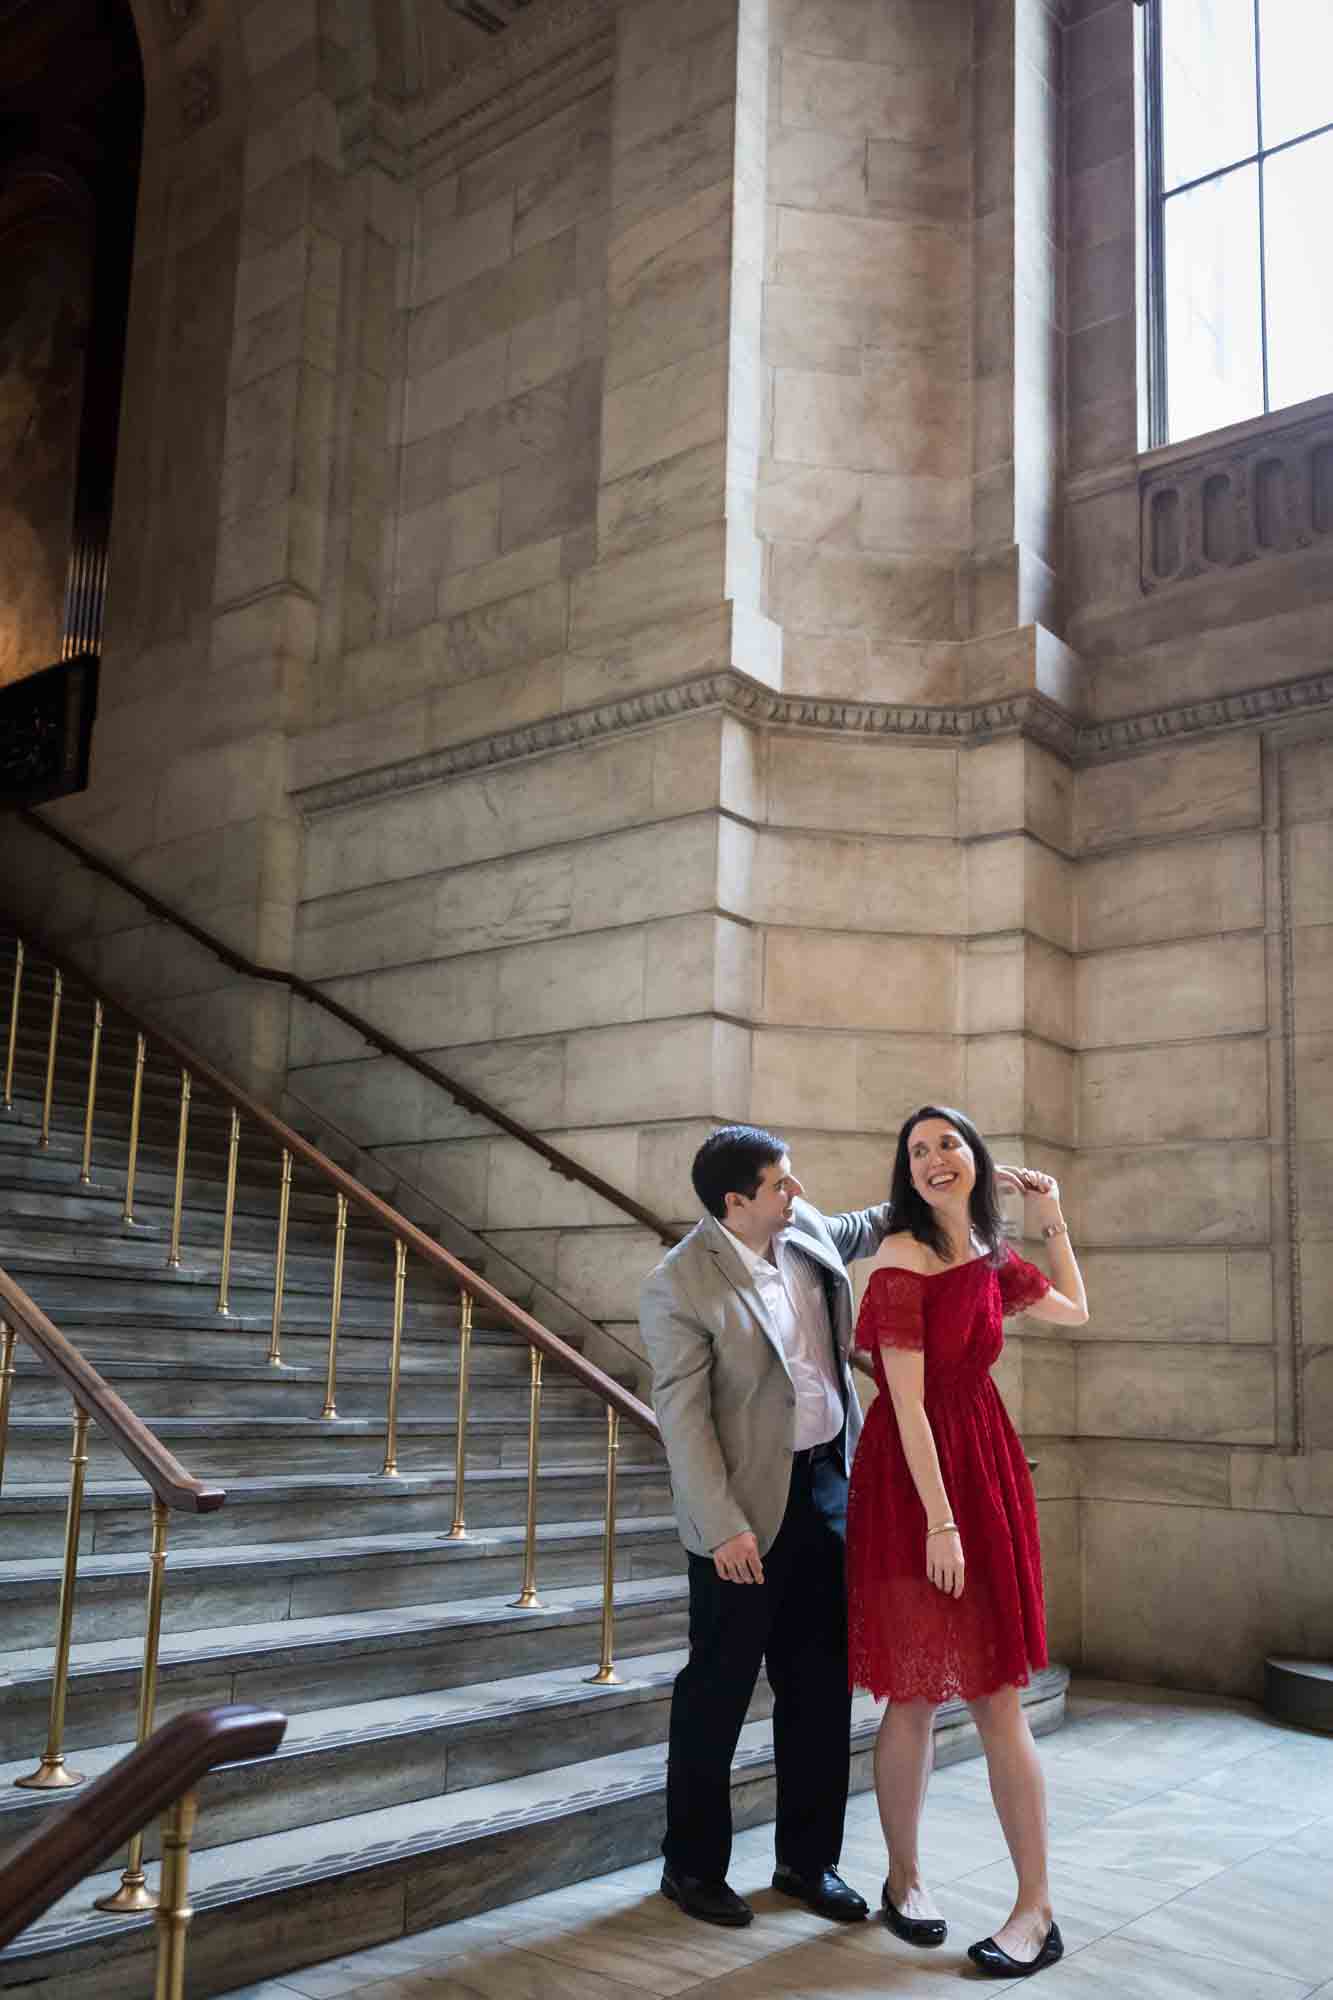 Couple dancing in front of staircase and grey stone wall during a New York Public Library surprise proposal